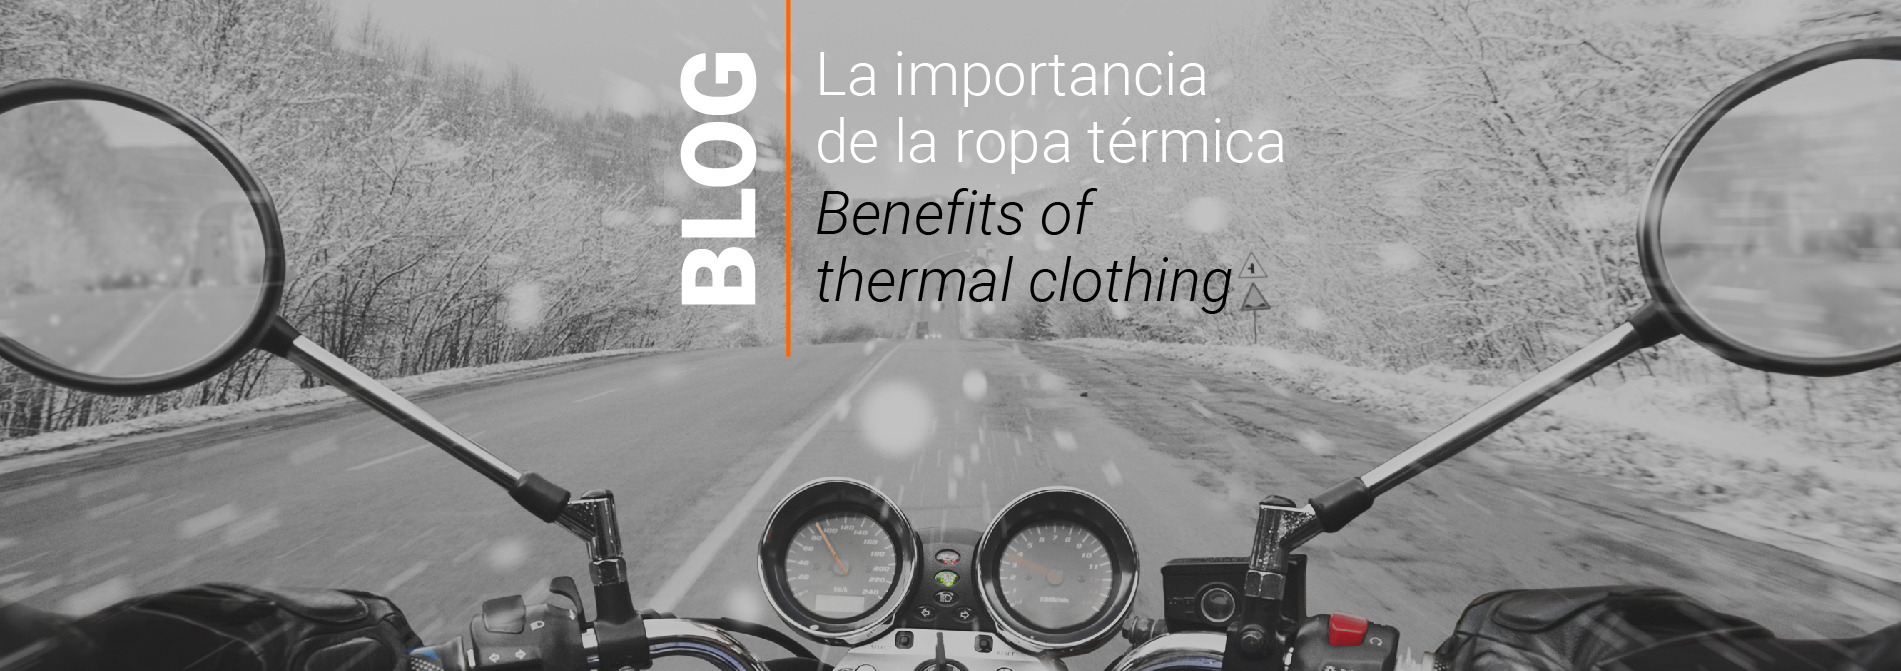 BENEFITS OF THERMAL CLOTHING FOR MOTORBIKER